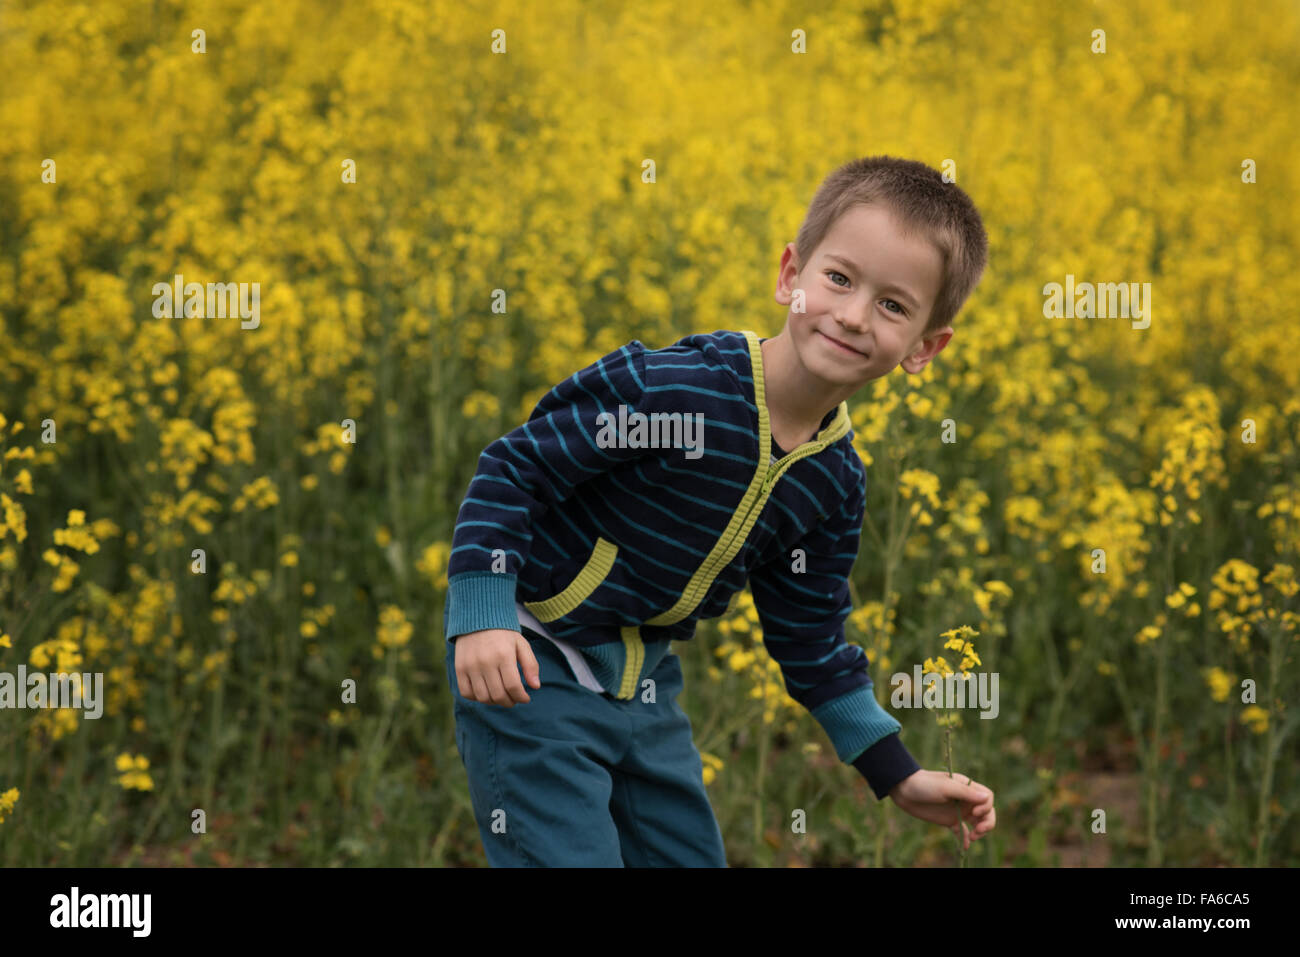 Smiling boy messing about in rapeseed field Stock Photo